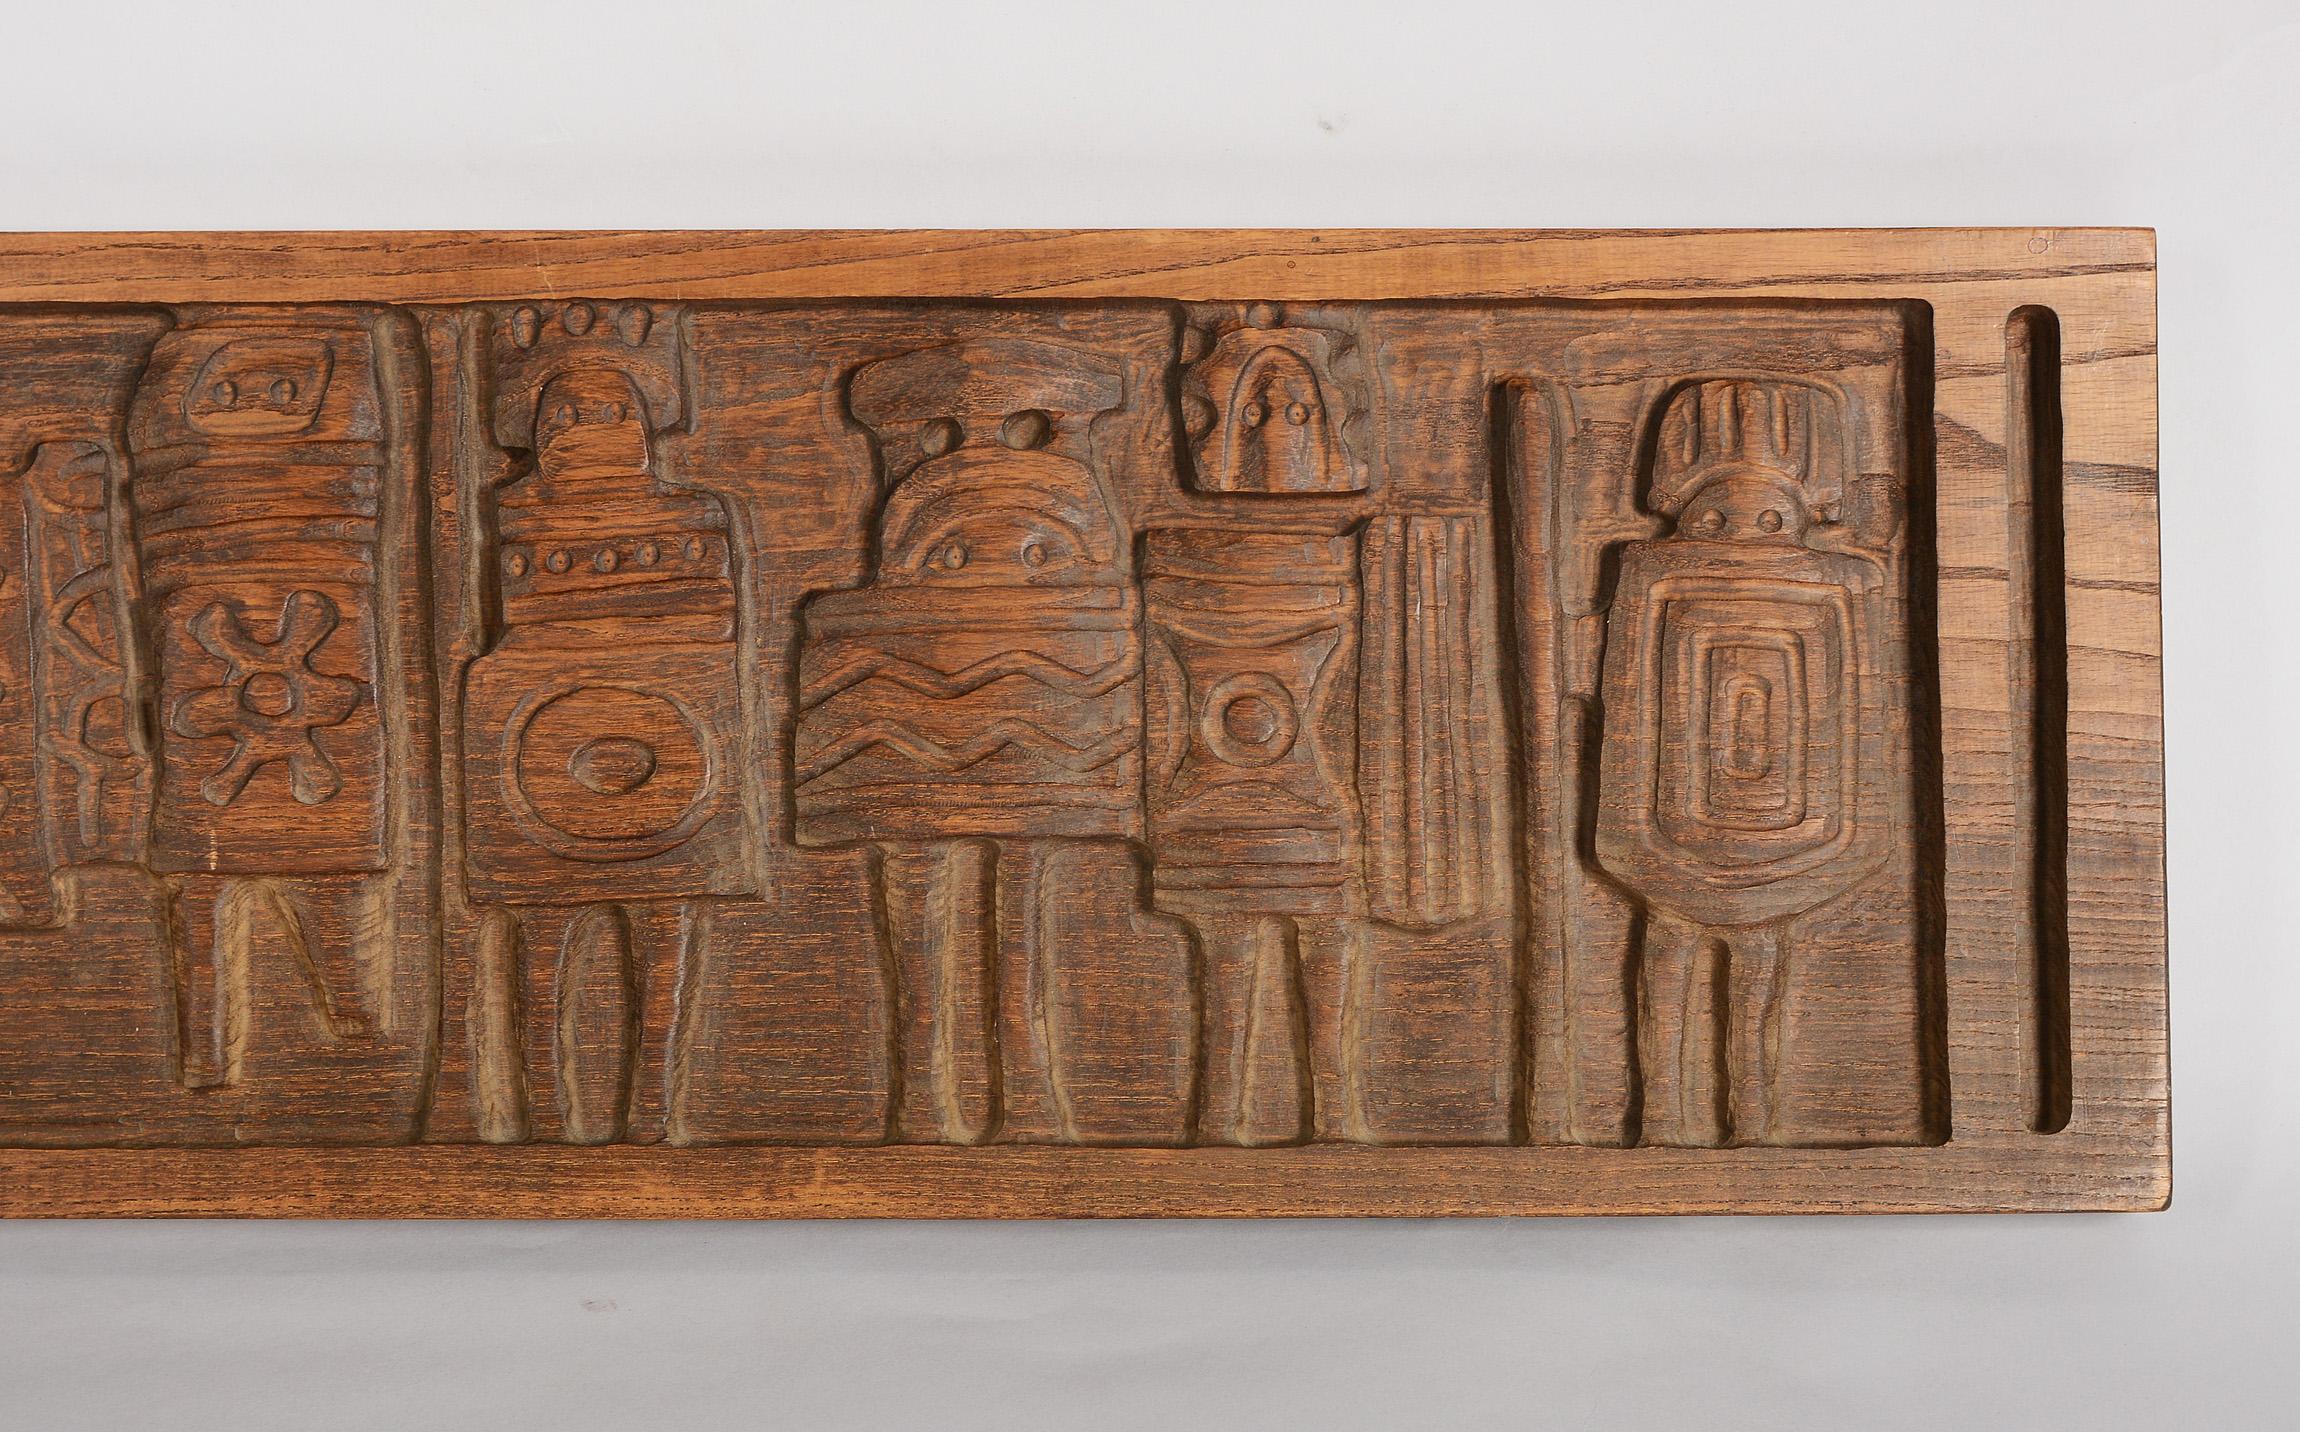 Large carved panel of tribal warriors designed by Evelyn Ackerman. The figures have very stylized and whimsical shields and headdress. The back is marked Era Industries and has a model number on it. The wood looks to be stained ash oak.